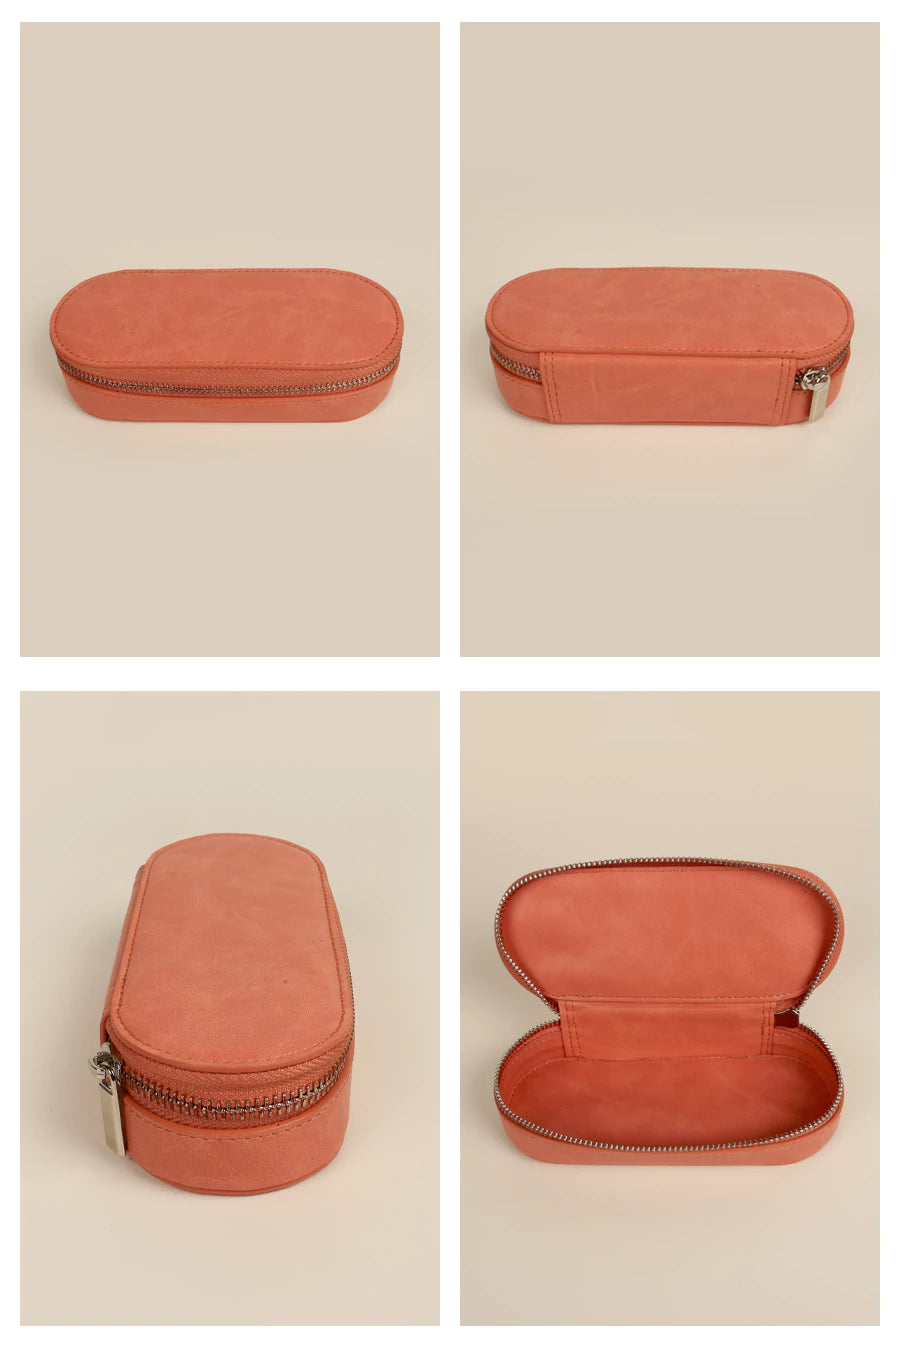 Vegan Leather eyewear case or sunglass cover coral details